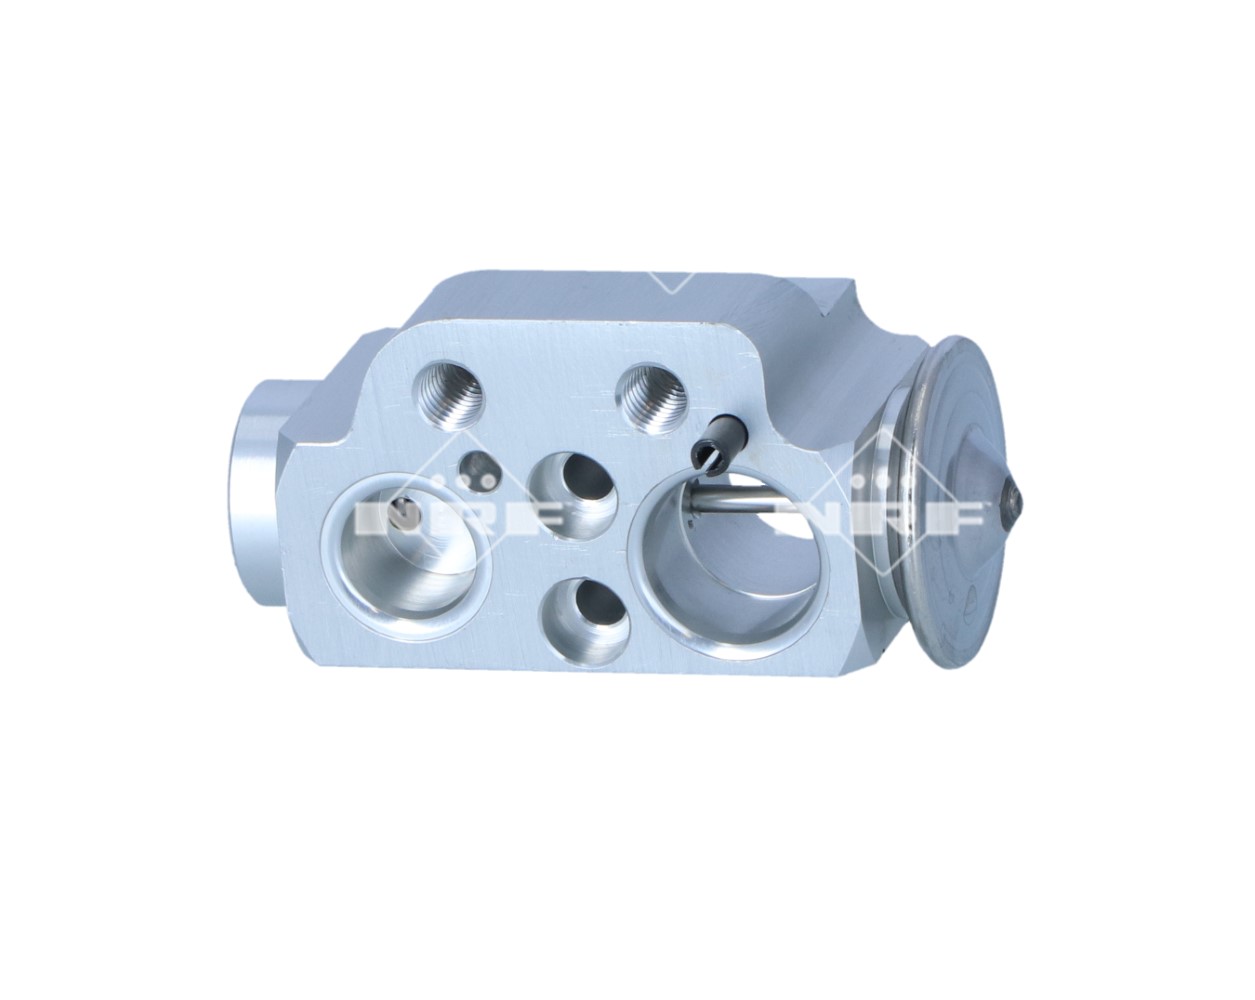 NRF 38508 AC expansion valve SEAT experience and price